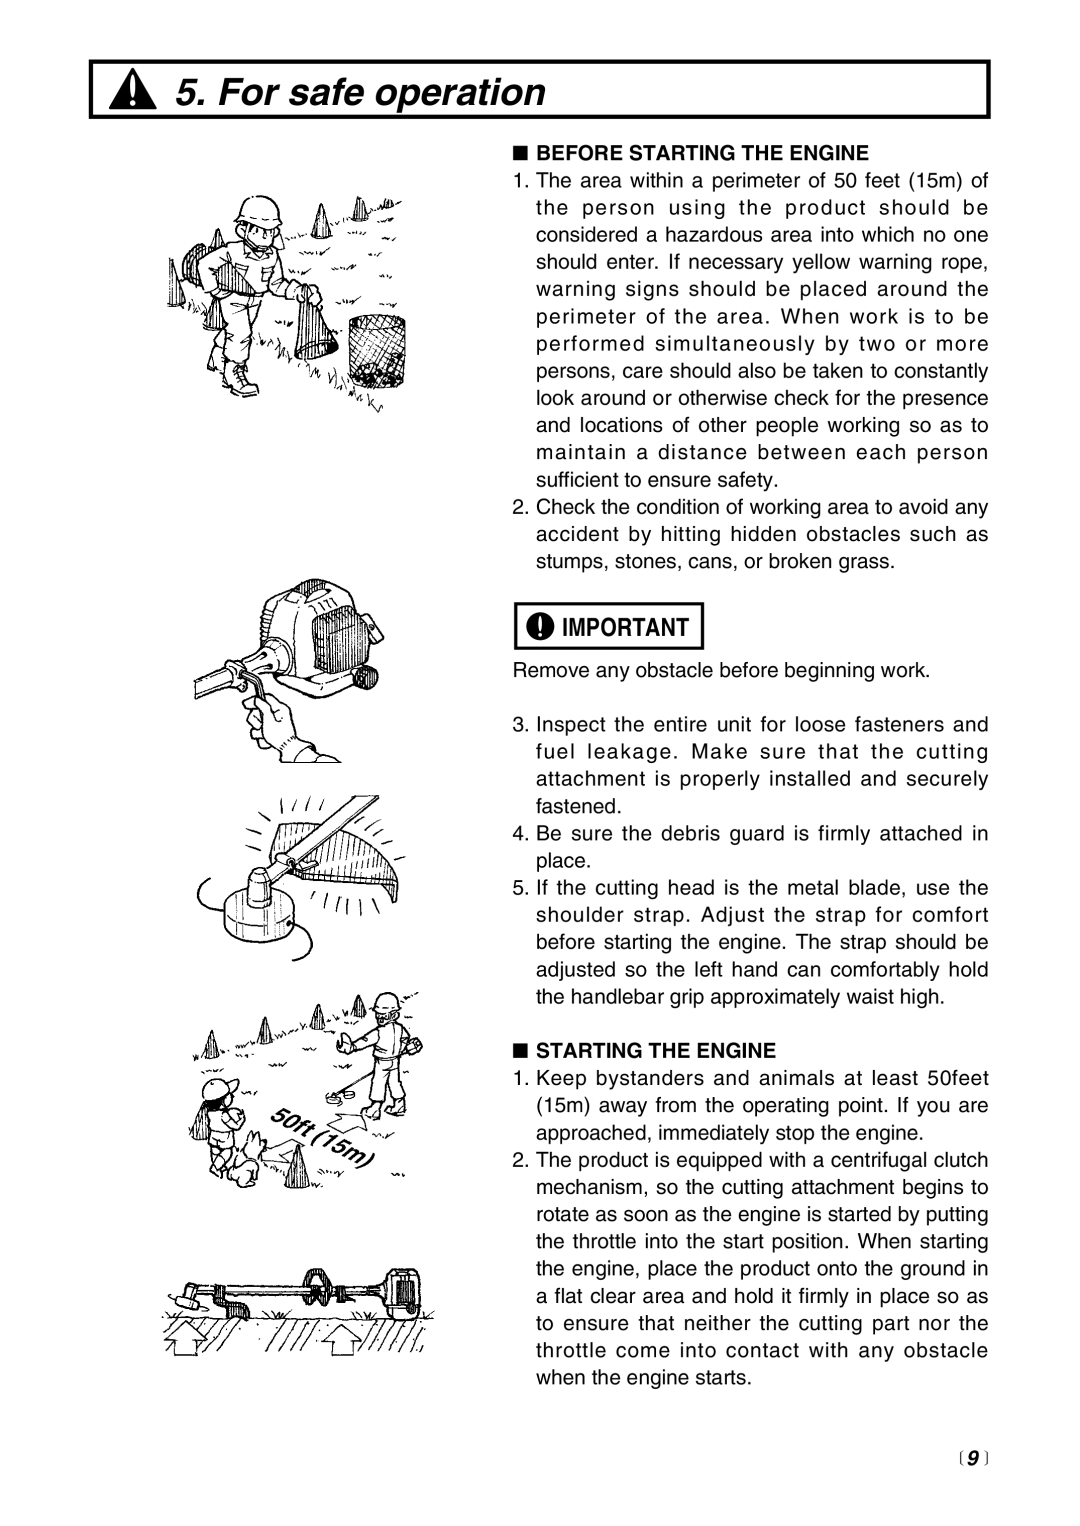 RedMax BT250 manual  9 , For safe operation, Before Starting The Engine 